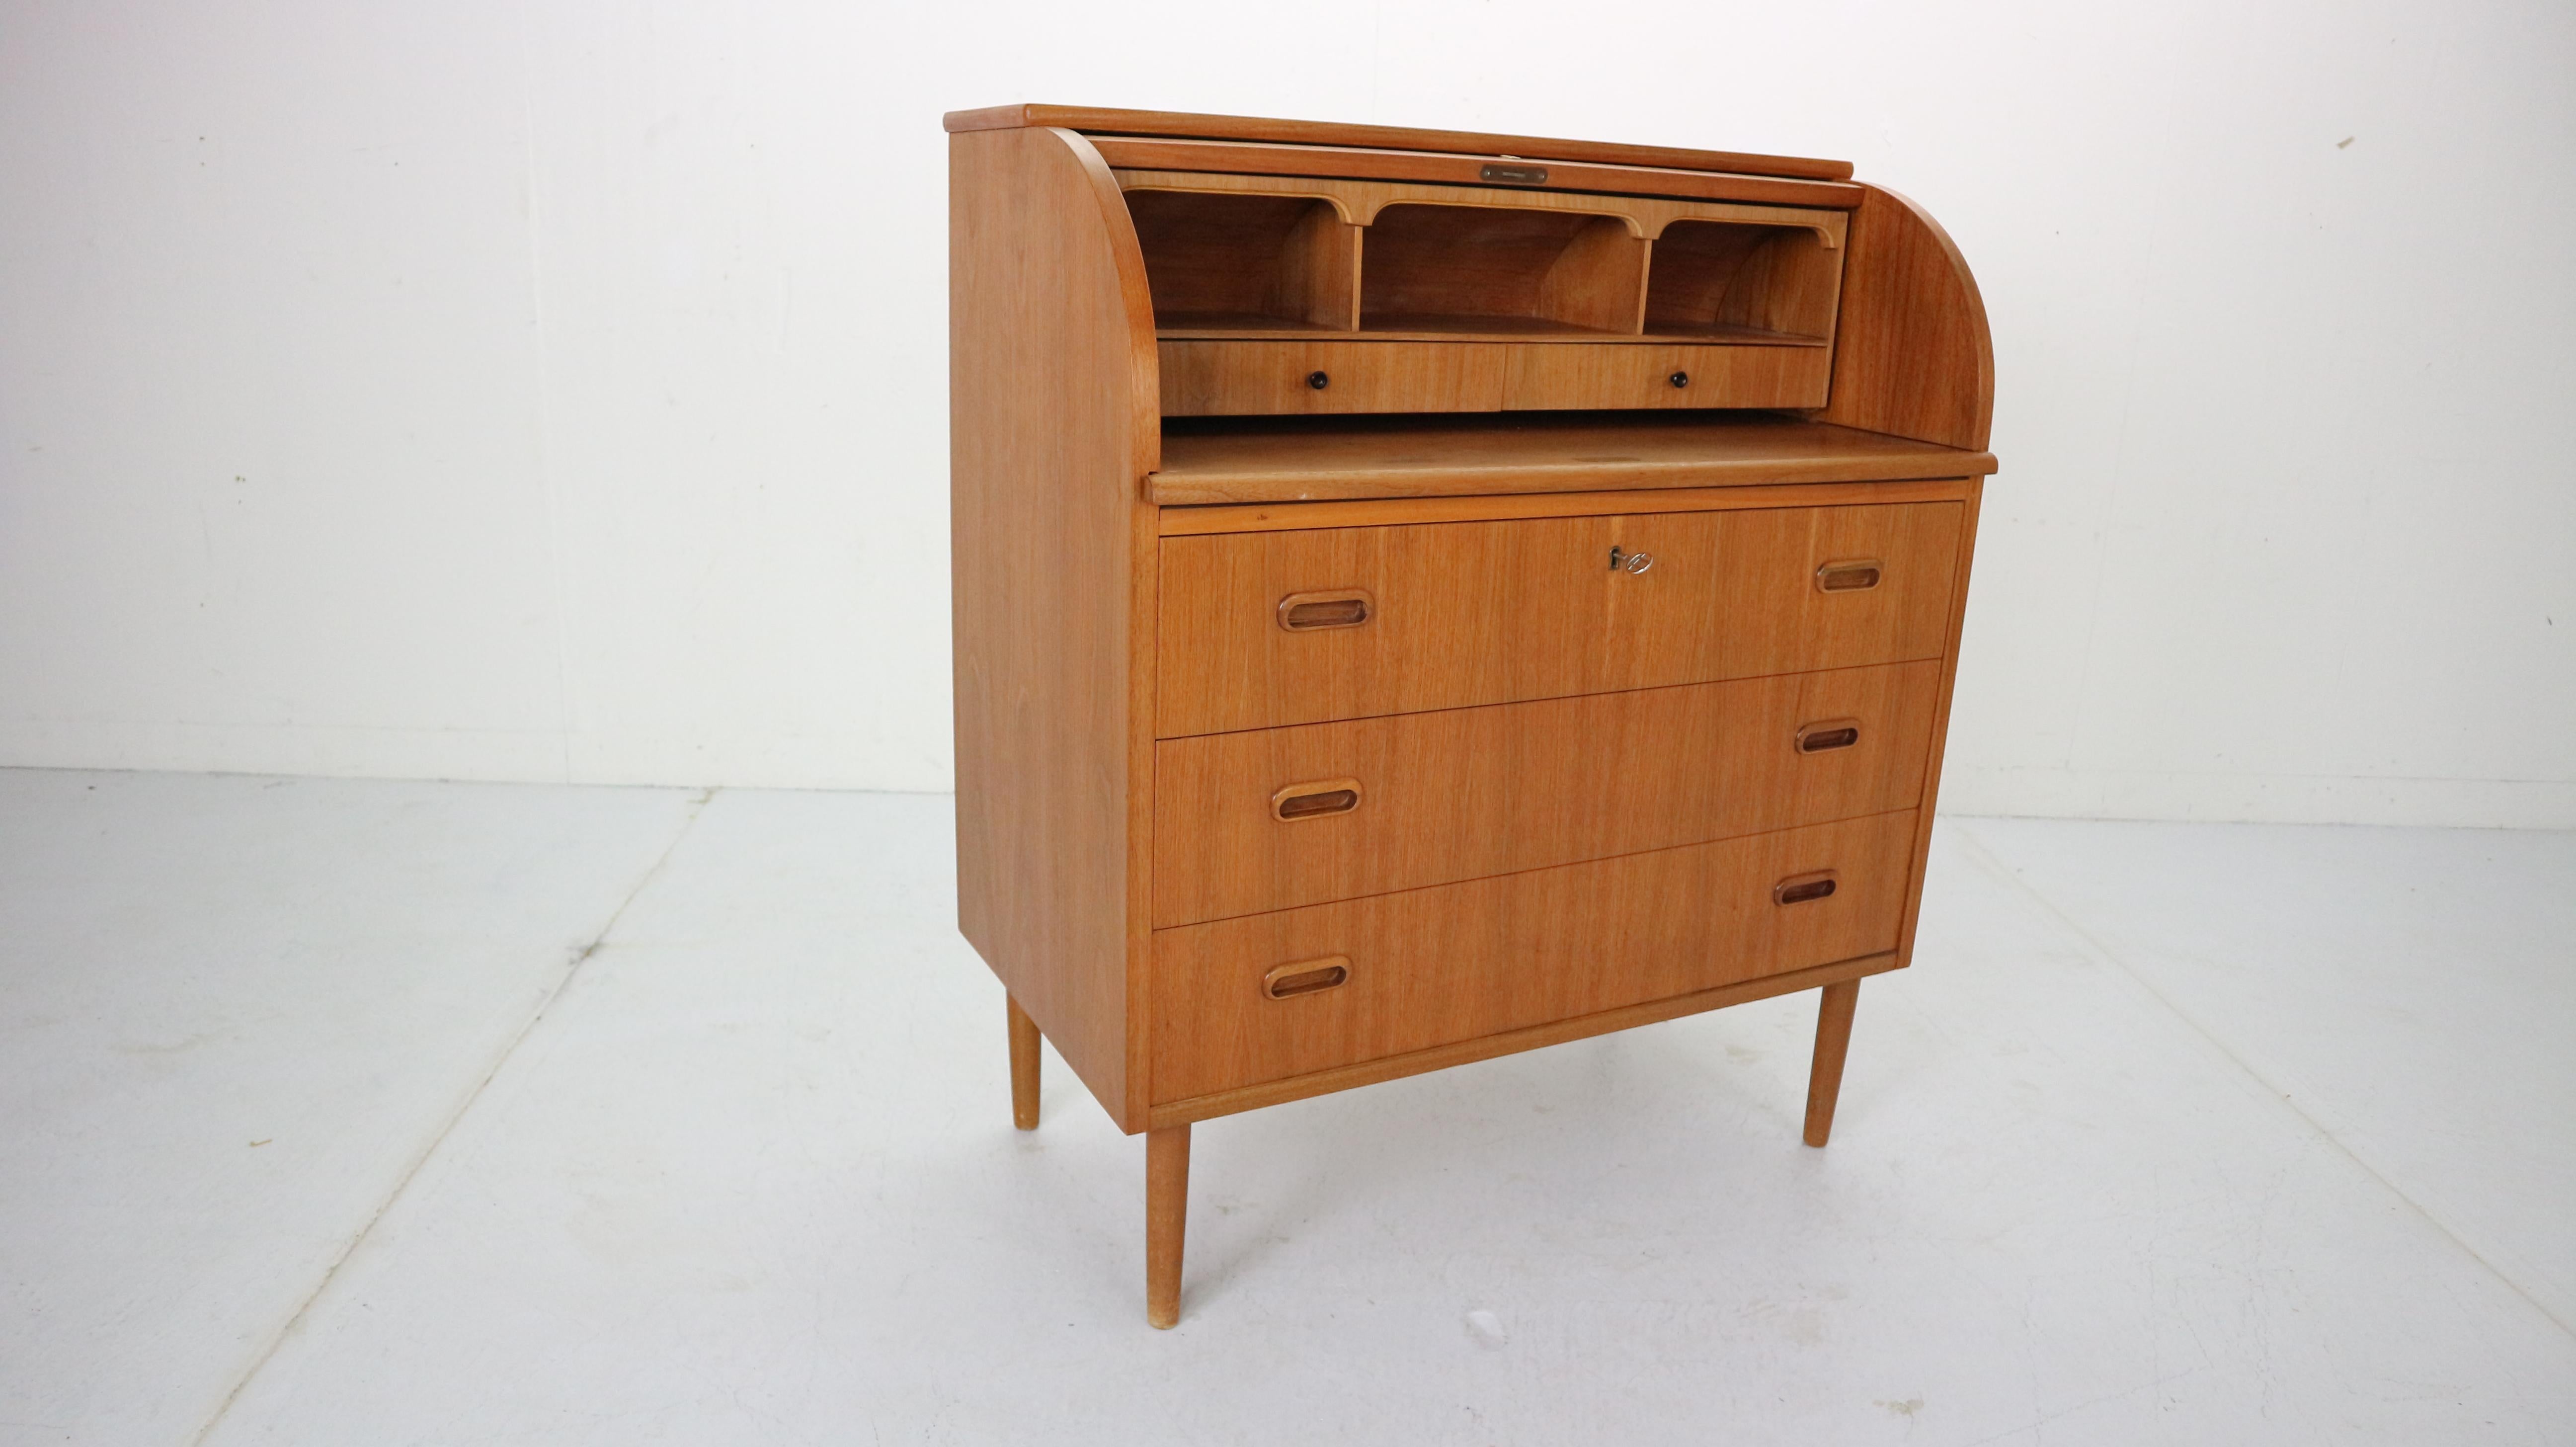 This iconic midcentury Swedish modern teak cylinder rolltop secretary- desk- cabinet is made in 1970's Sweeden by Egon Ostergaard designer and manufactured by Markaryds Mobelindustri manufacture. 
The Classic Scandinavian Modern design has clean